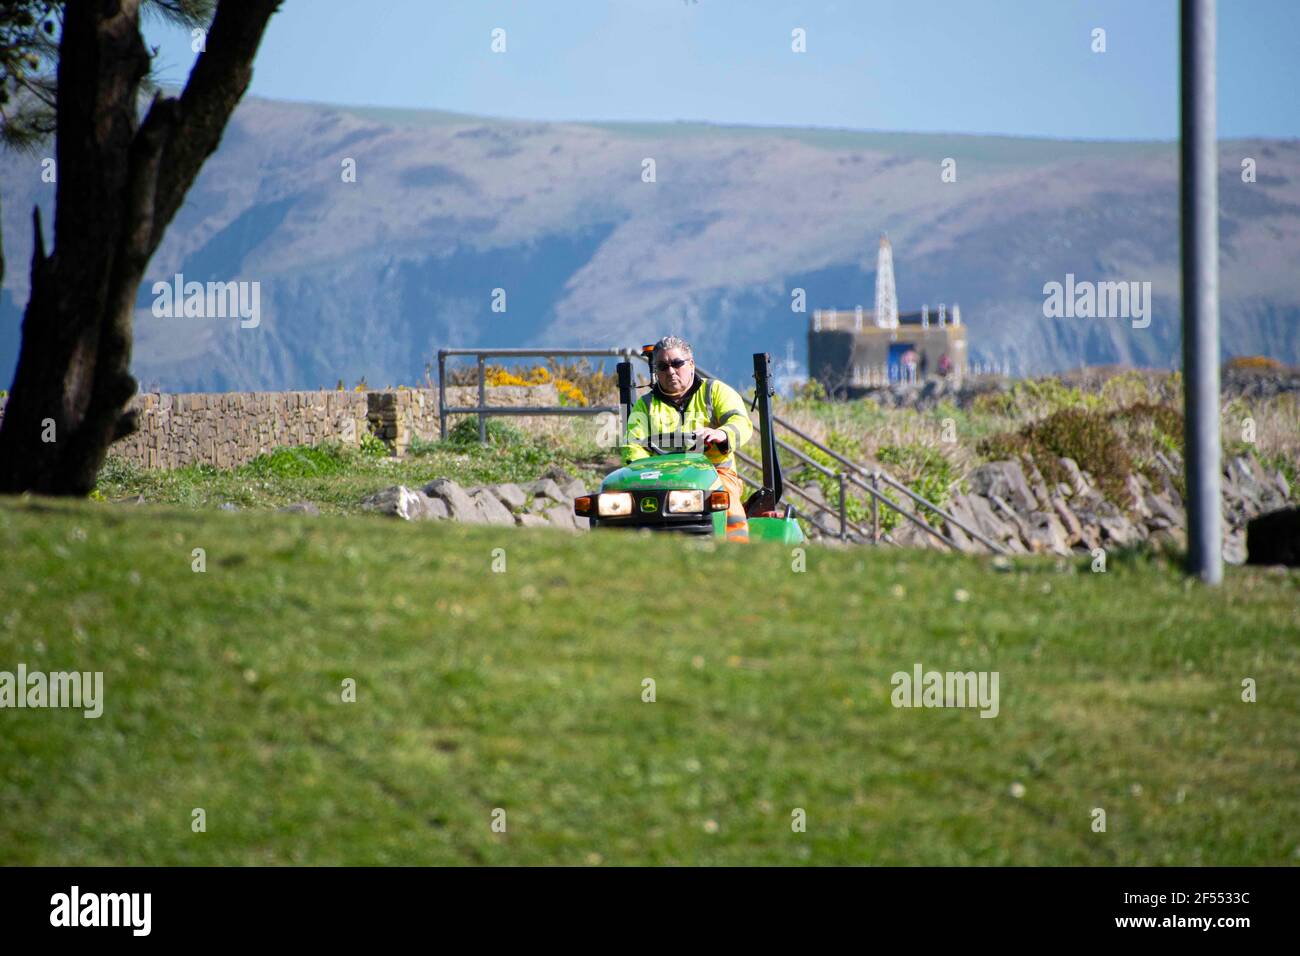 Fishguard, Pembrokeshire, uk .24 March  2021. Workers in their  high vis jackets ride  on grass cutters  as  more visitors  arrive ,Pembrokeshire County Council therefore has a difficult  to strike a balance as some cutting is essential for safety purposes, yet it is very keen to see al wild wildlife thrive wherever possible.  . Credit: Debra Angel/Alamy Live News Stock Photo